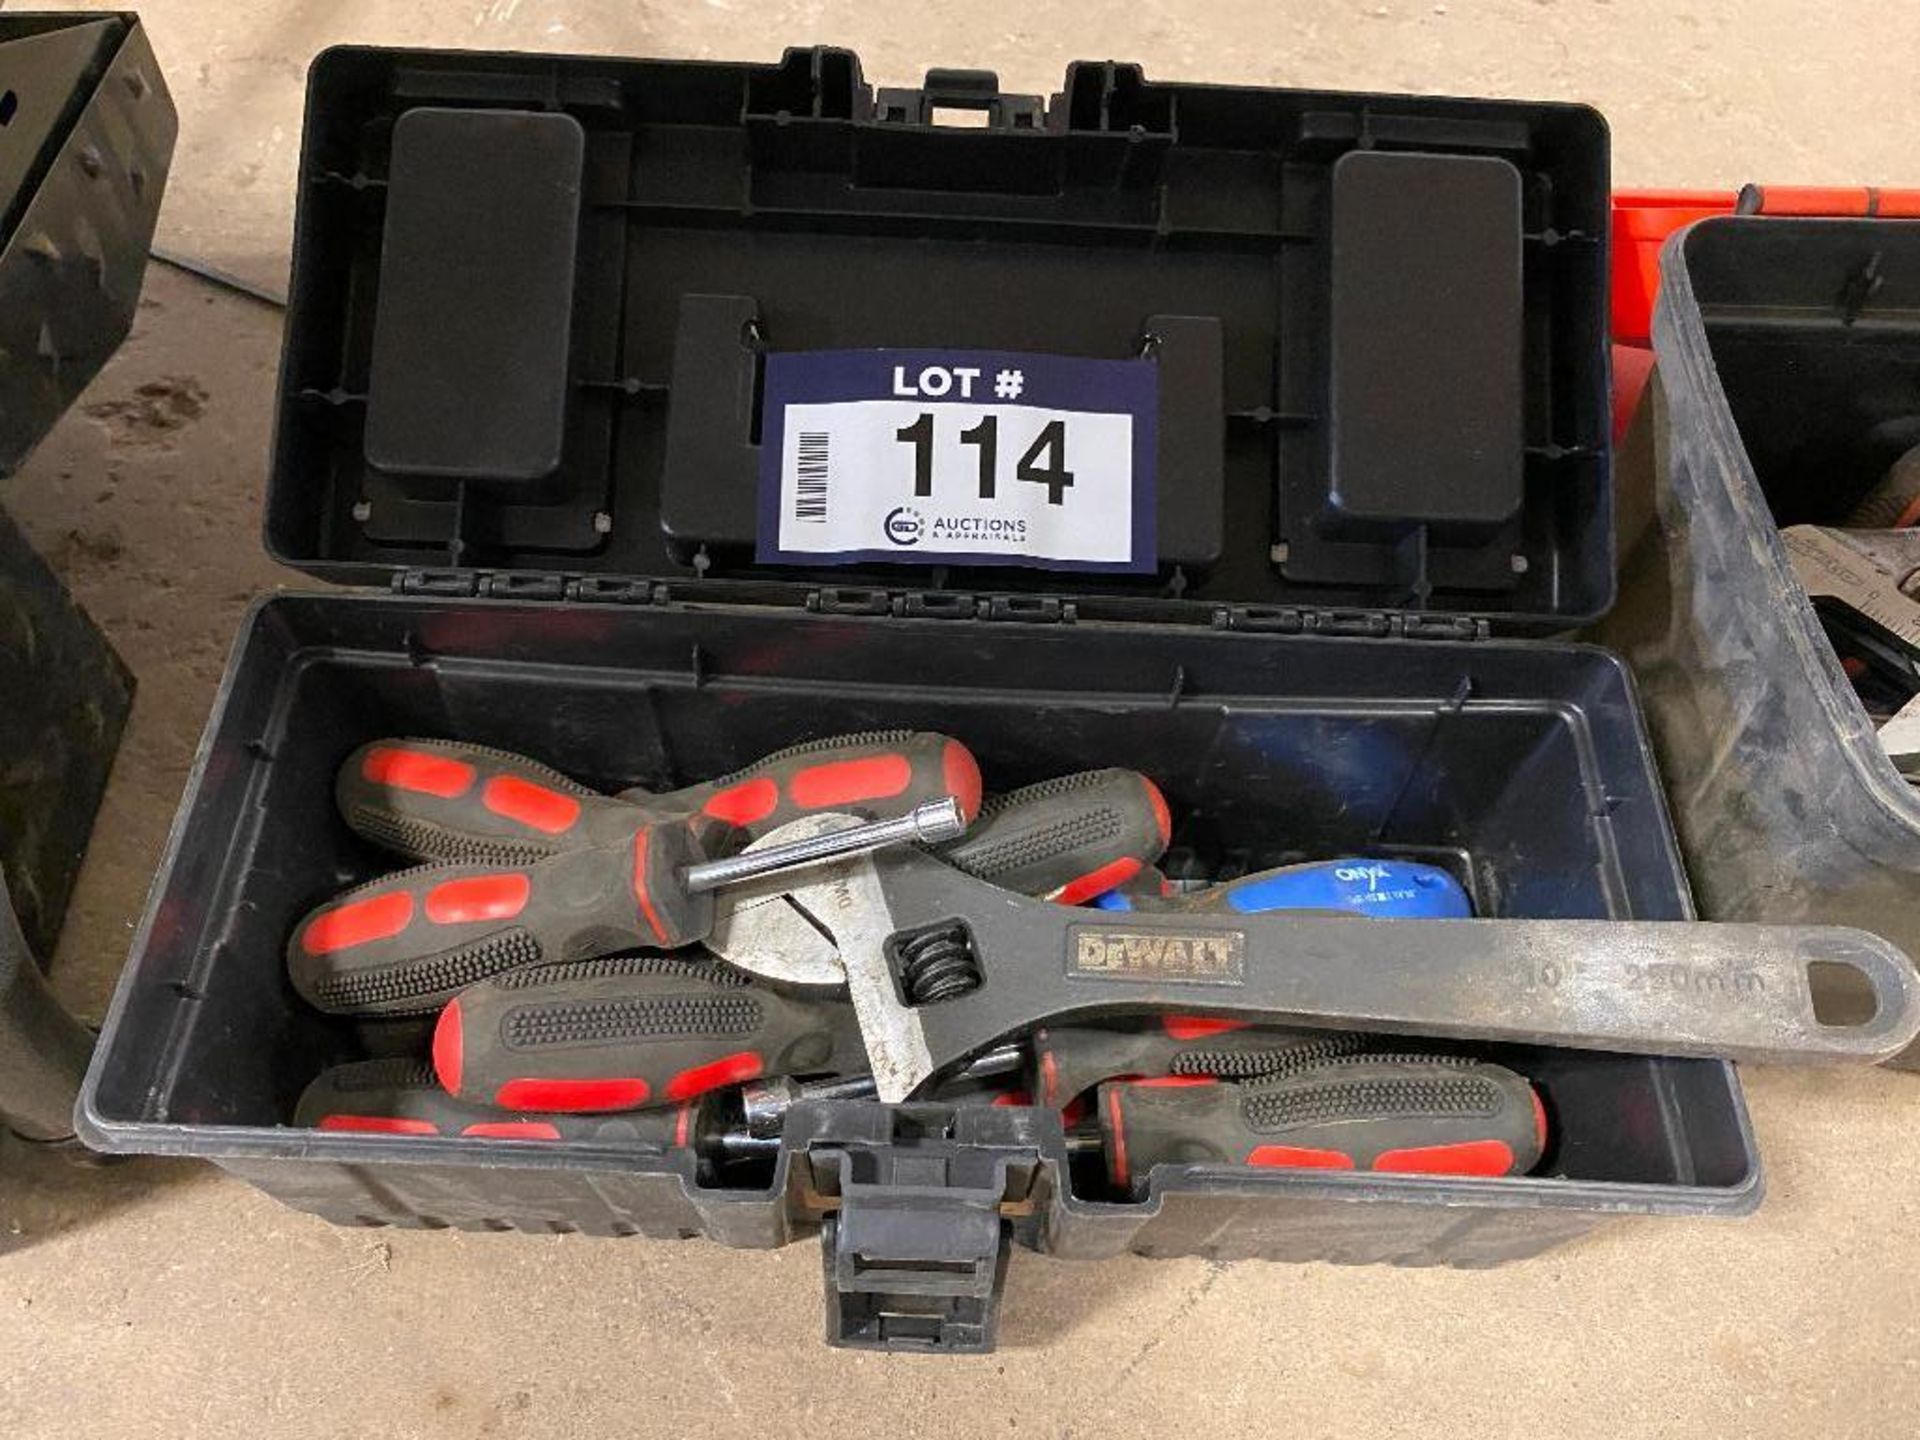 Tool Box w/ Asst. Tools including Crescent Wrench, Hex Screwdrivers, etc. - Image 2 of 2